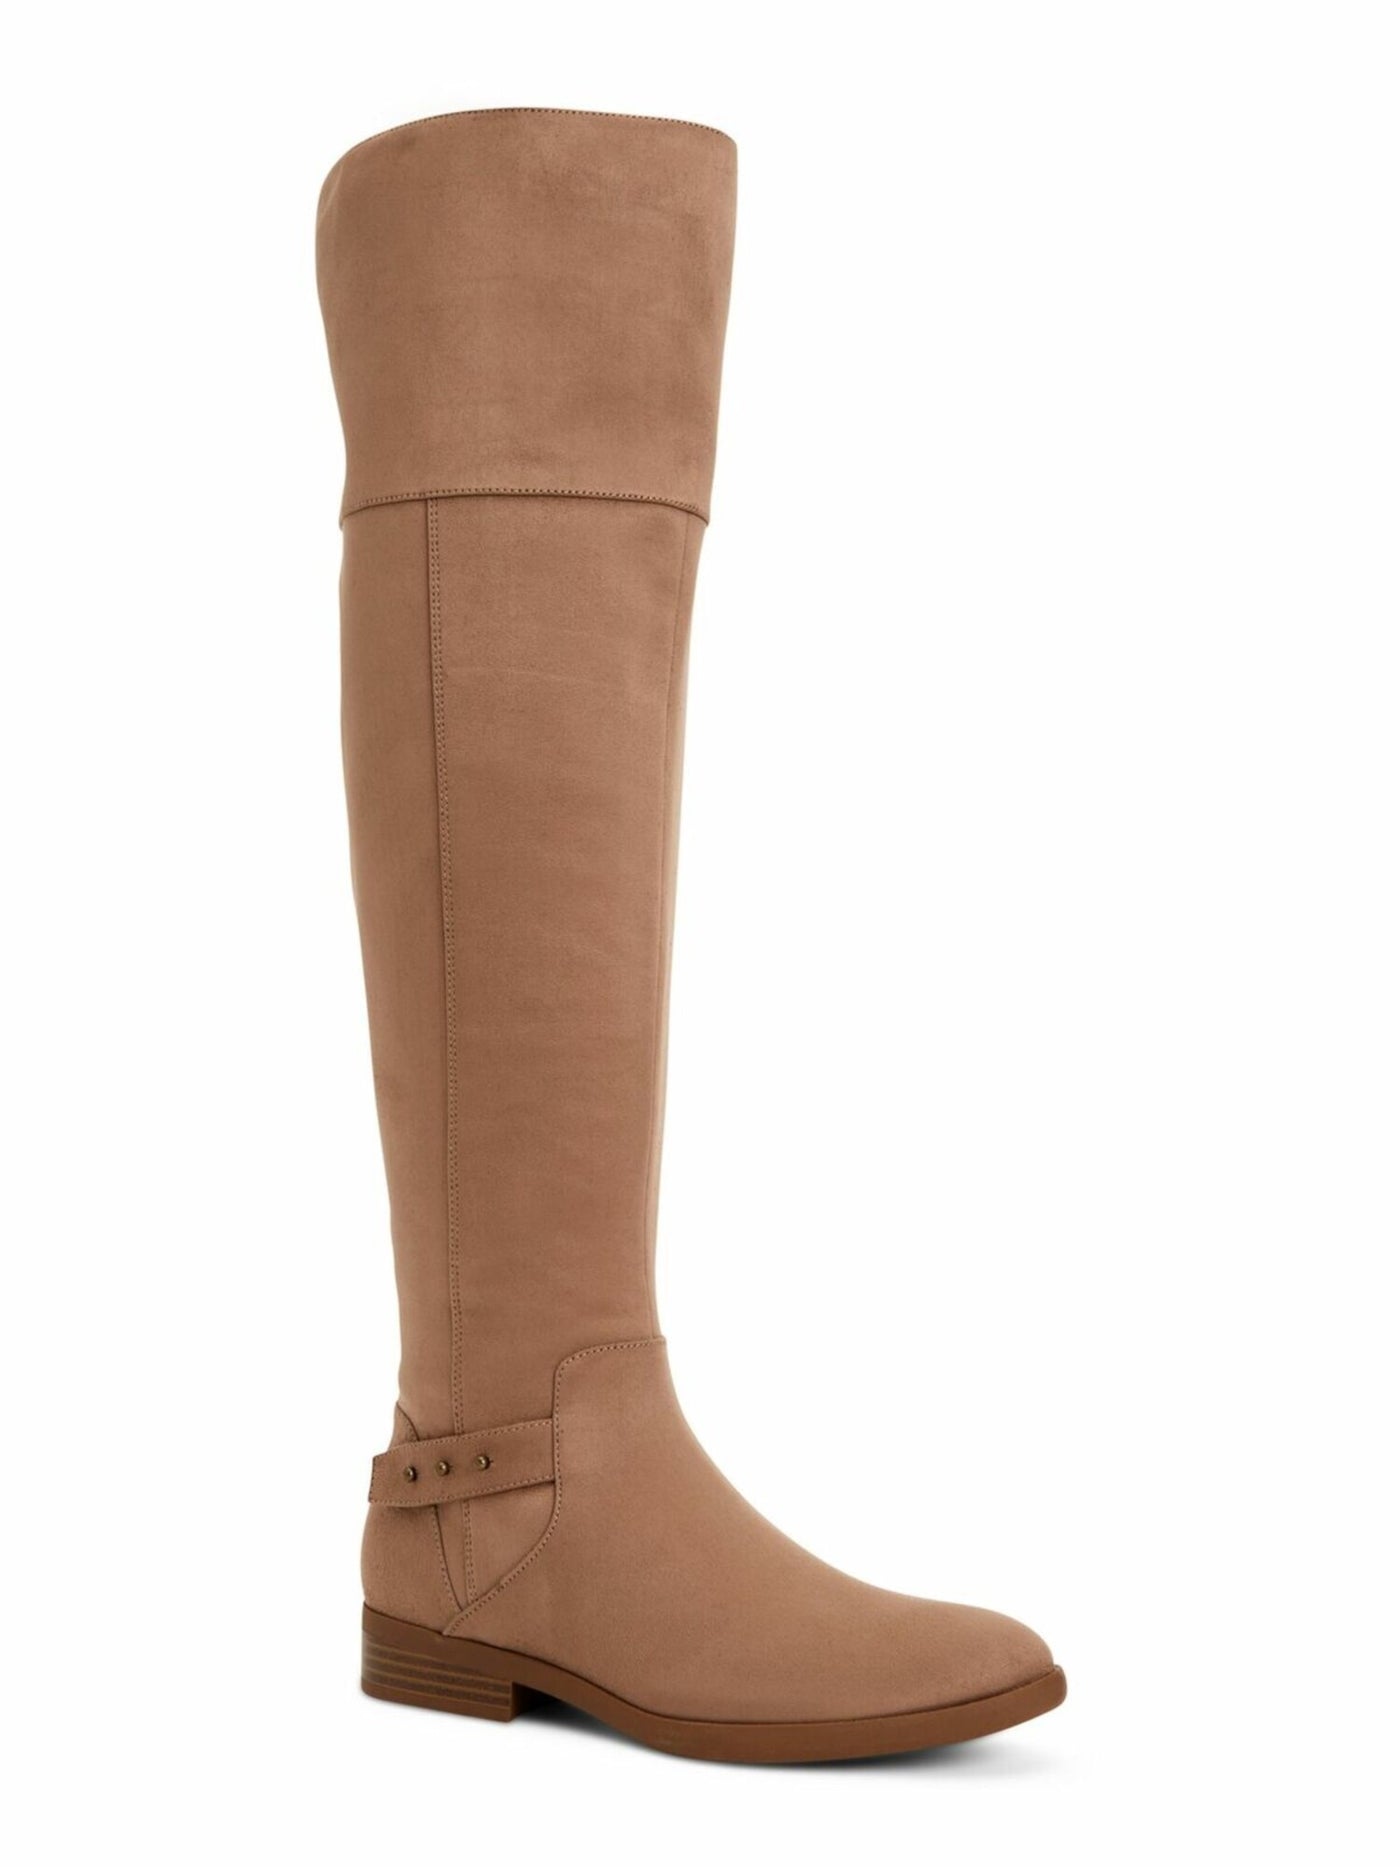 STYLE & COMPANY Womens Beige Round Toe Stacked Heel Zip-Up Dress Boots 12